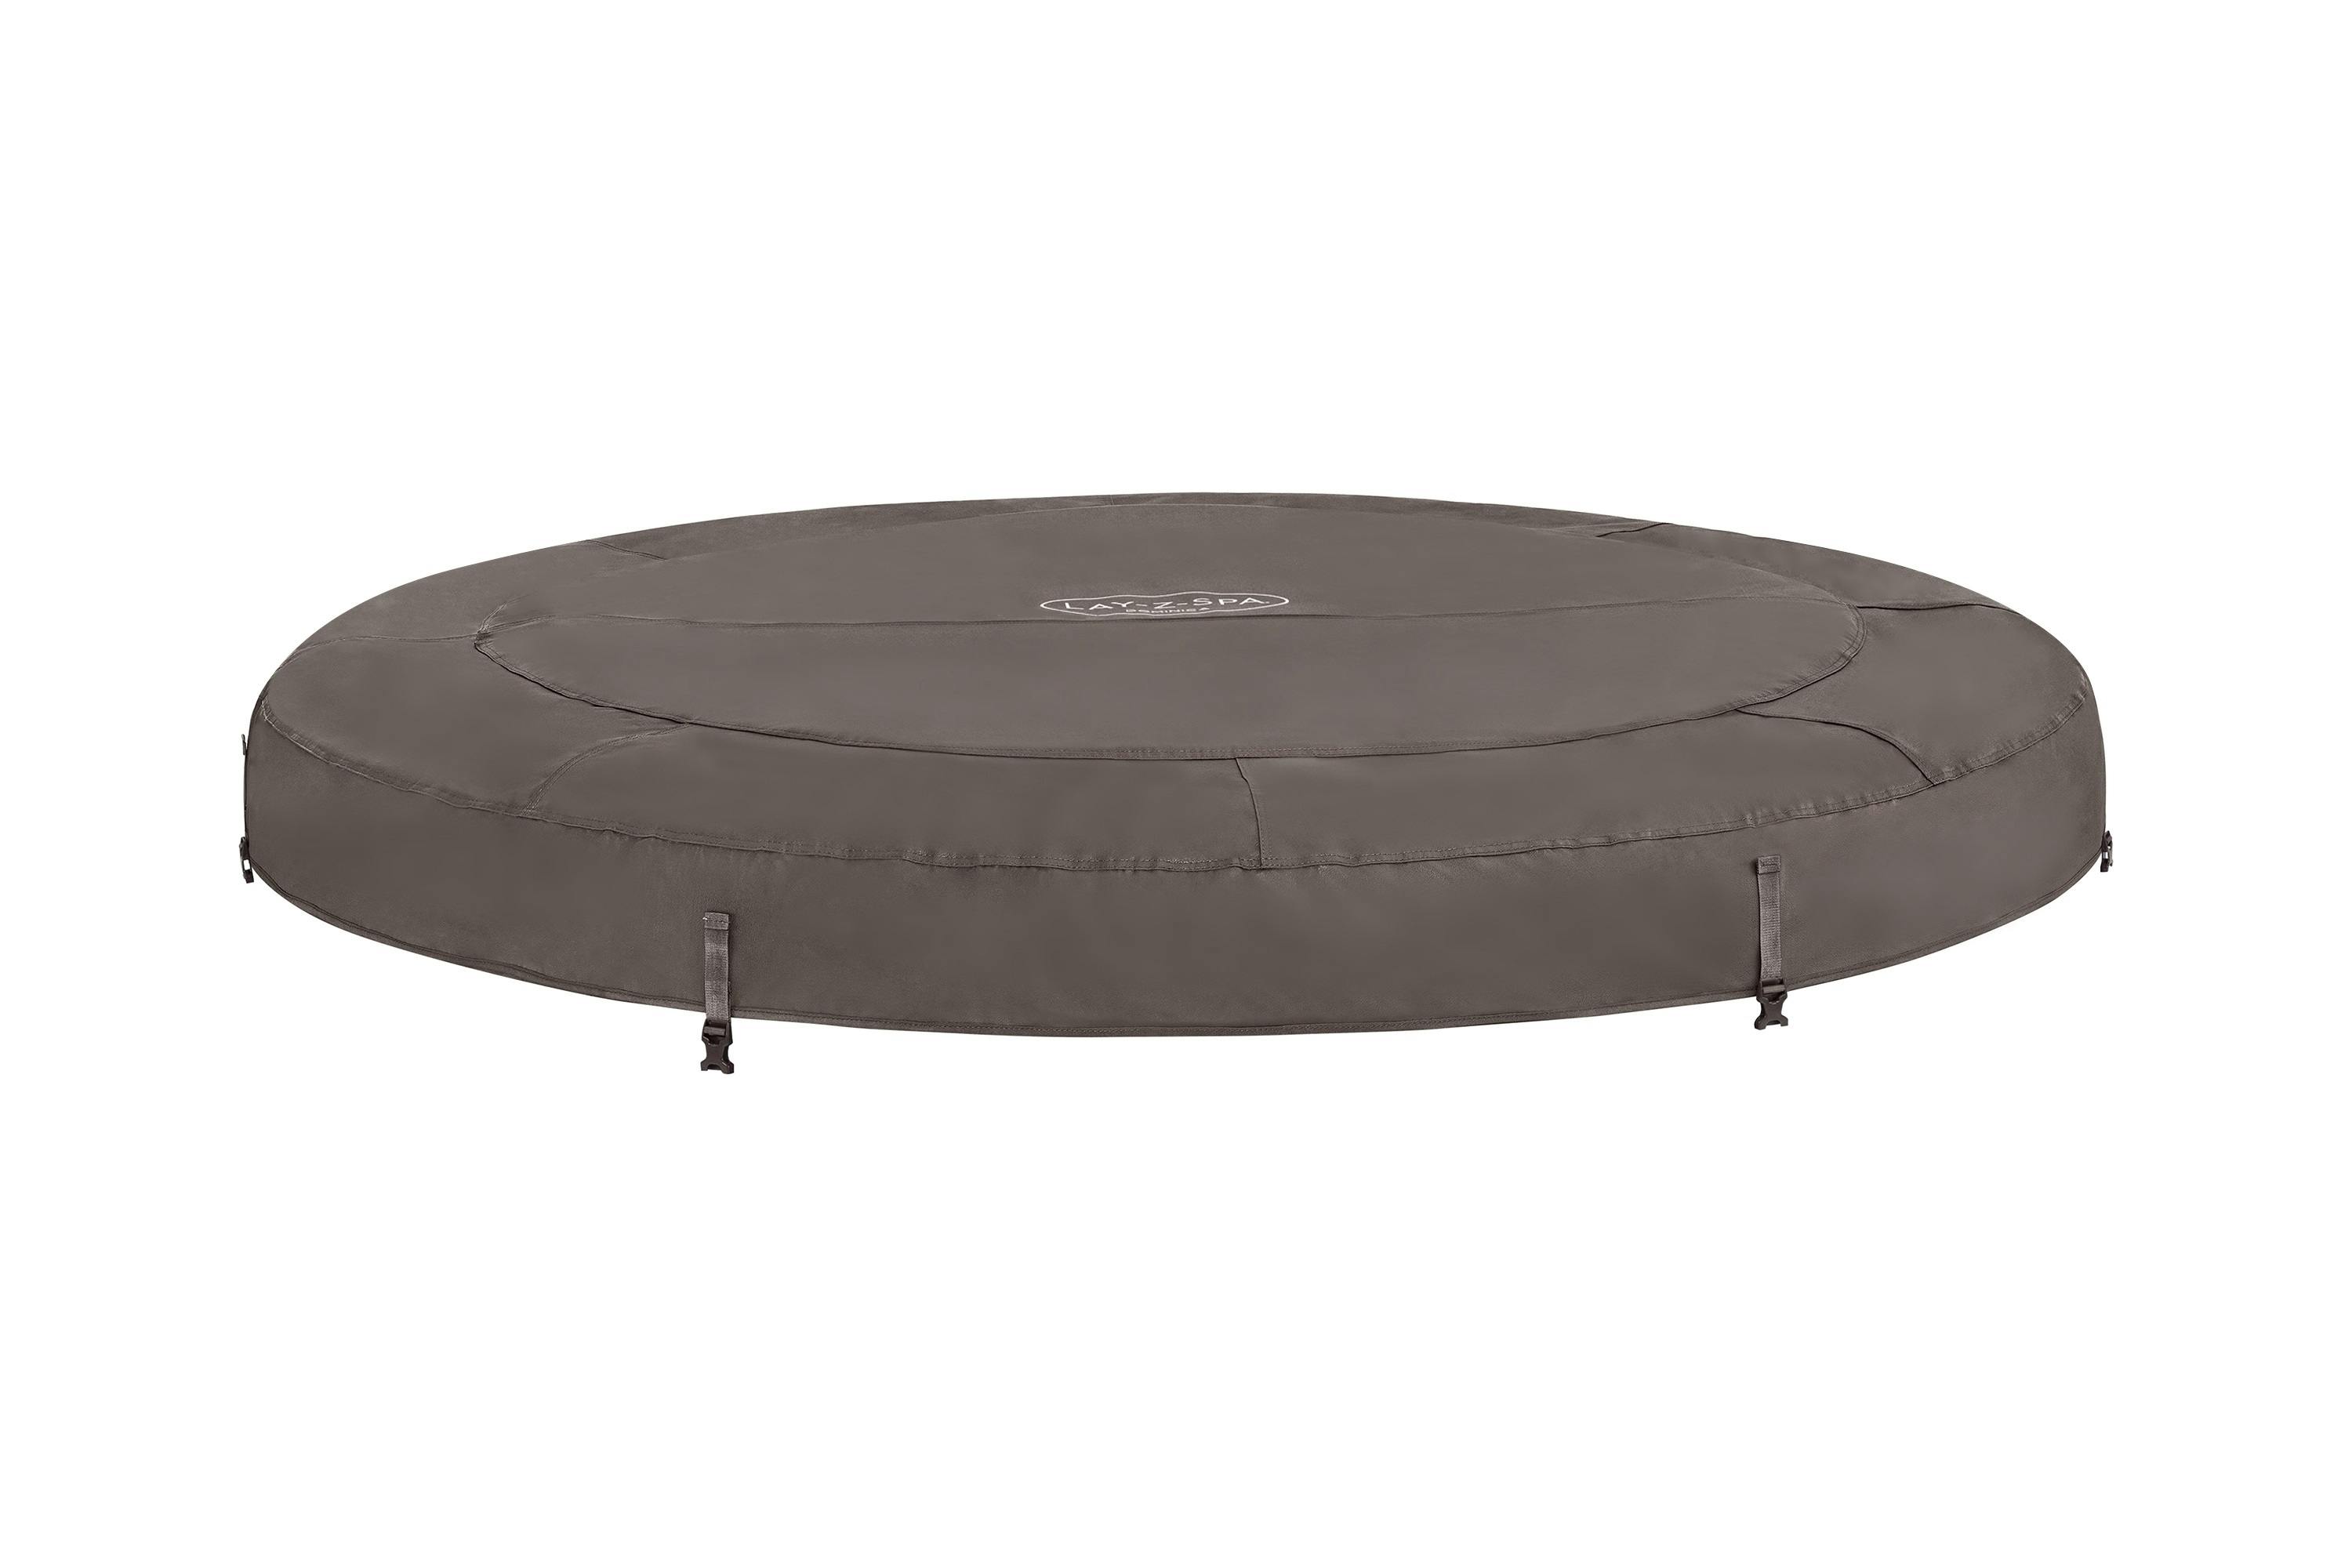 77" x 28"/1.96m x 71cm Dominica HydroJet SPA Top Leatheroid Cover